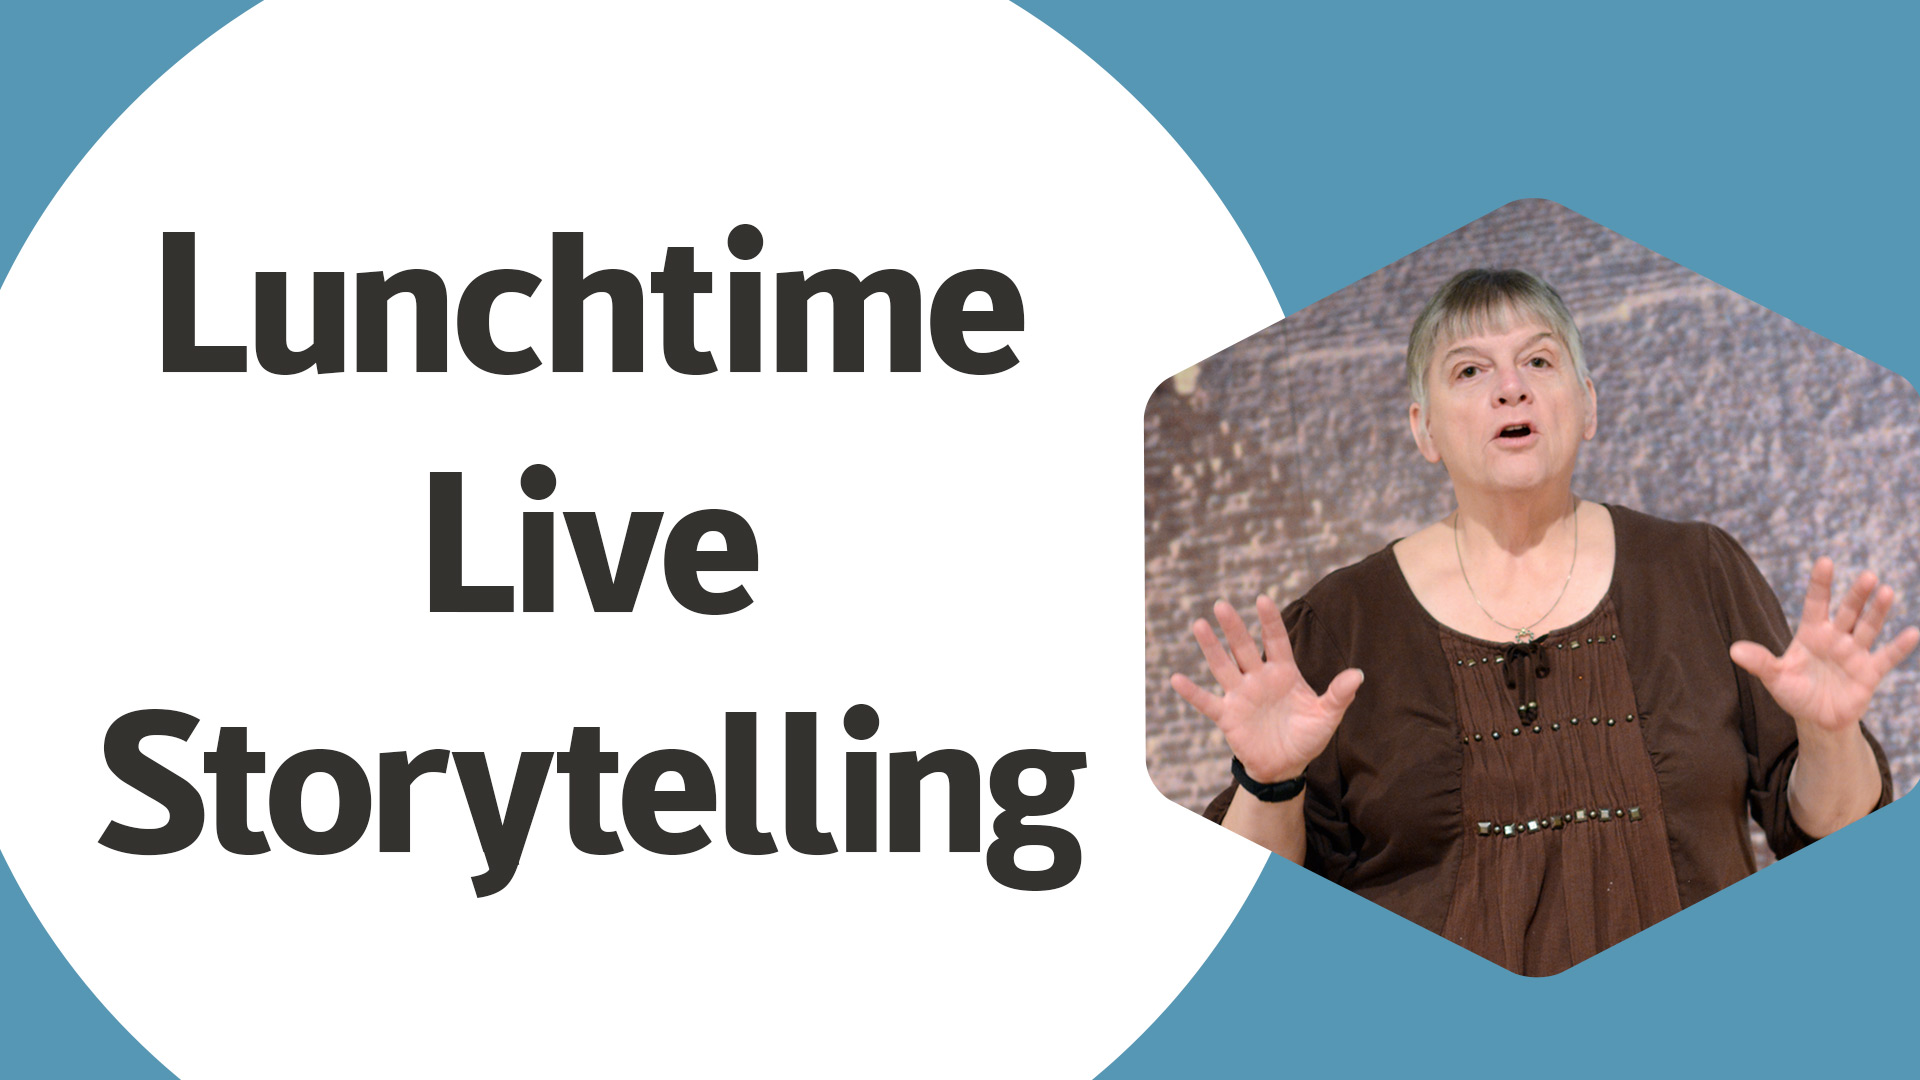 Lunchtime Live Storytelling with women holding hands up and telling a story to the camera